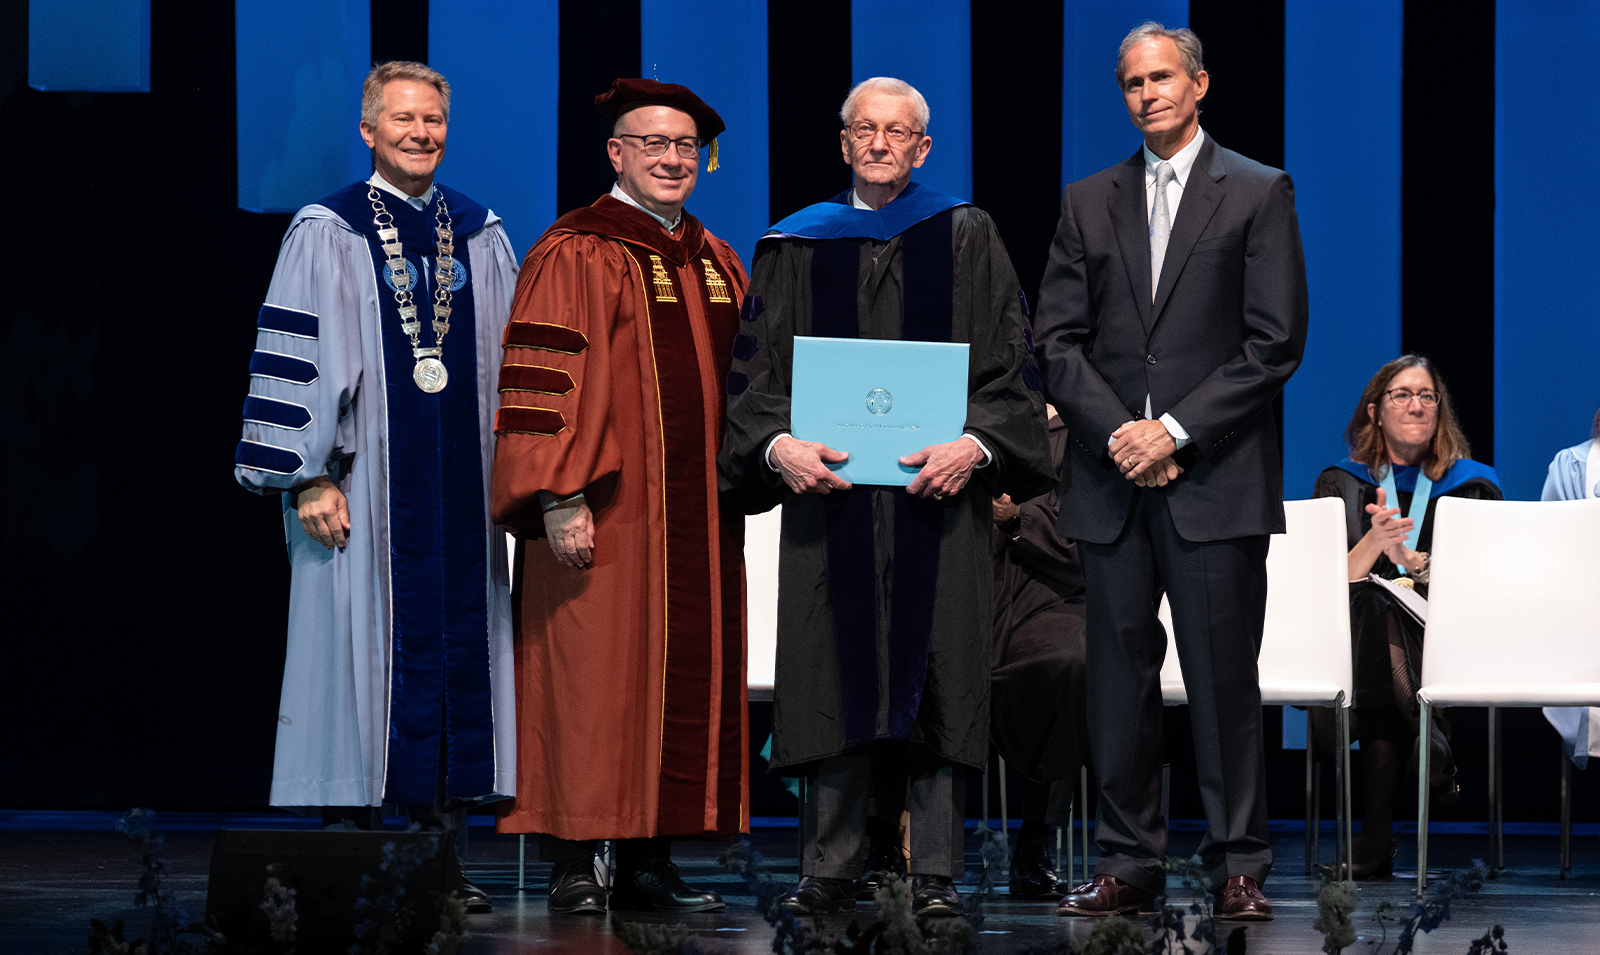 An award winner posing for photos on a stage with University leaders.